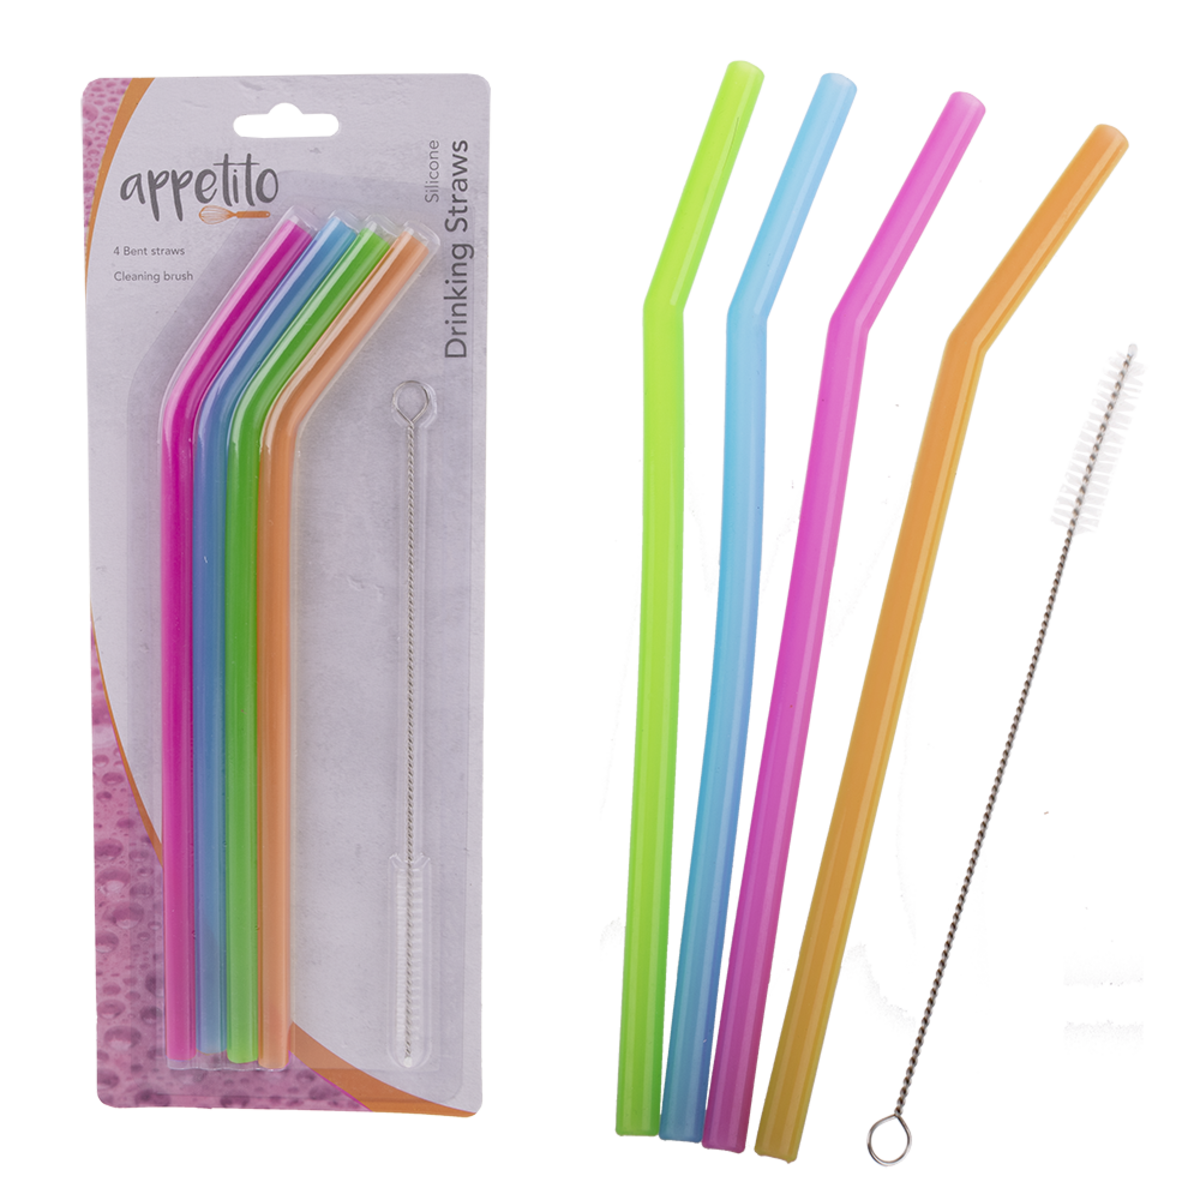 Appetito Translucent Silicone Bent Drinking Straws With Brush - 5pc